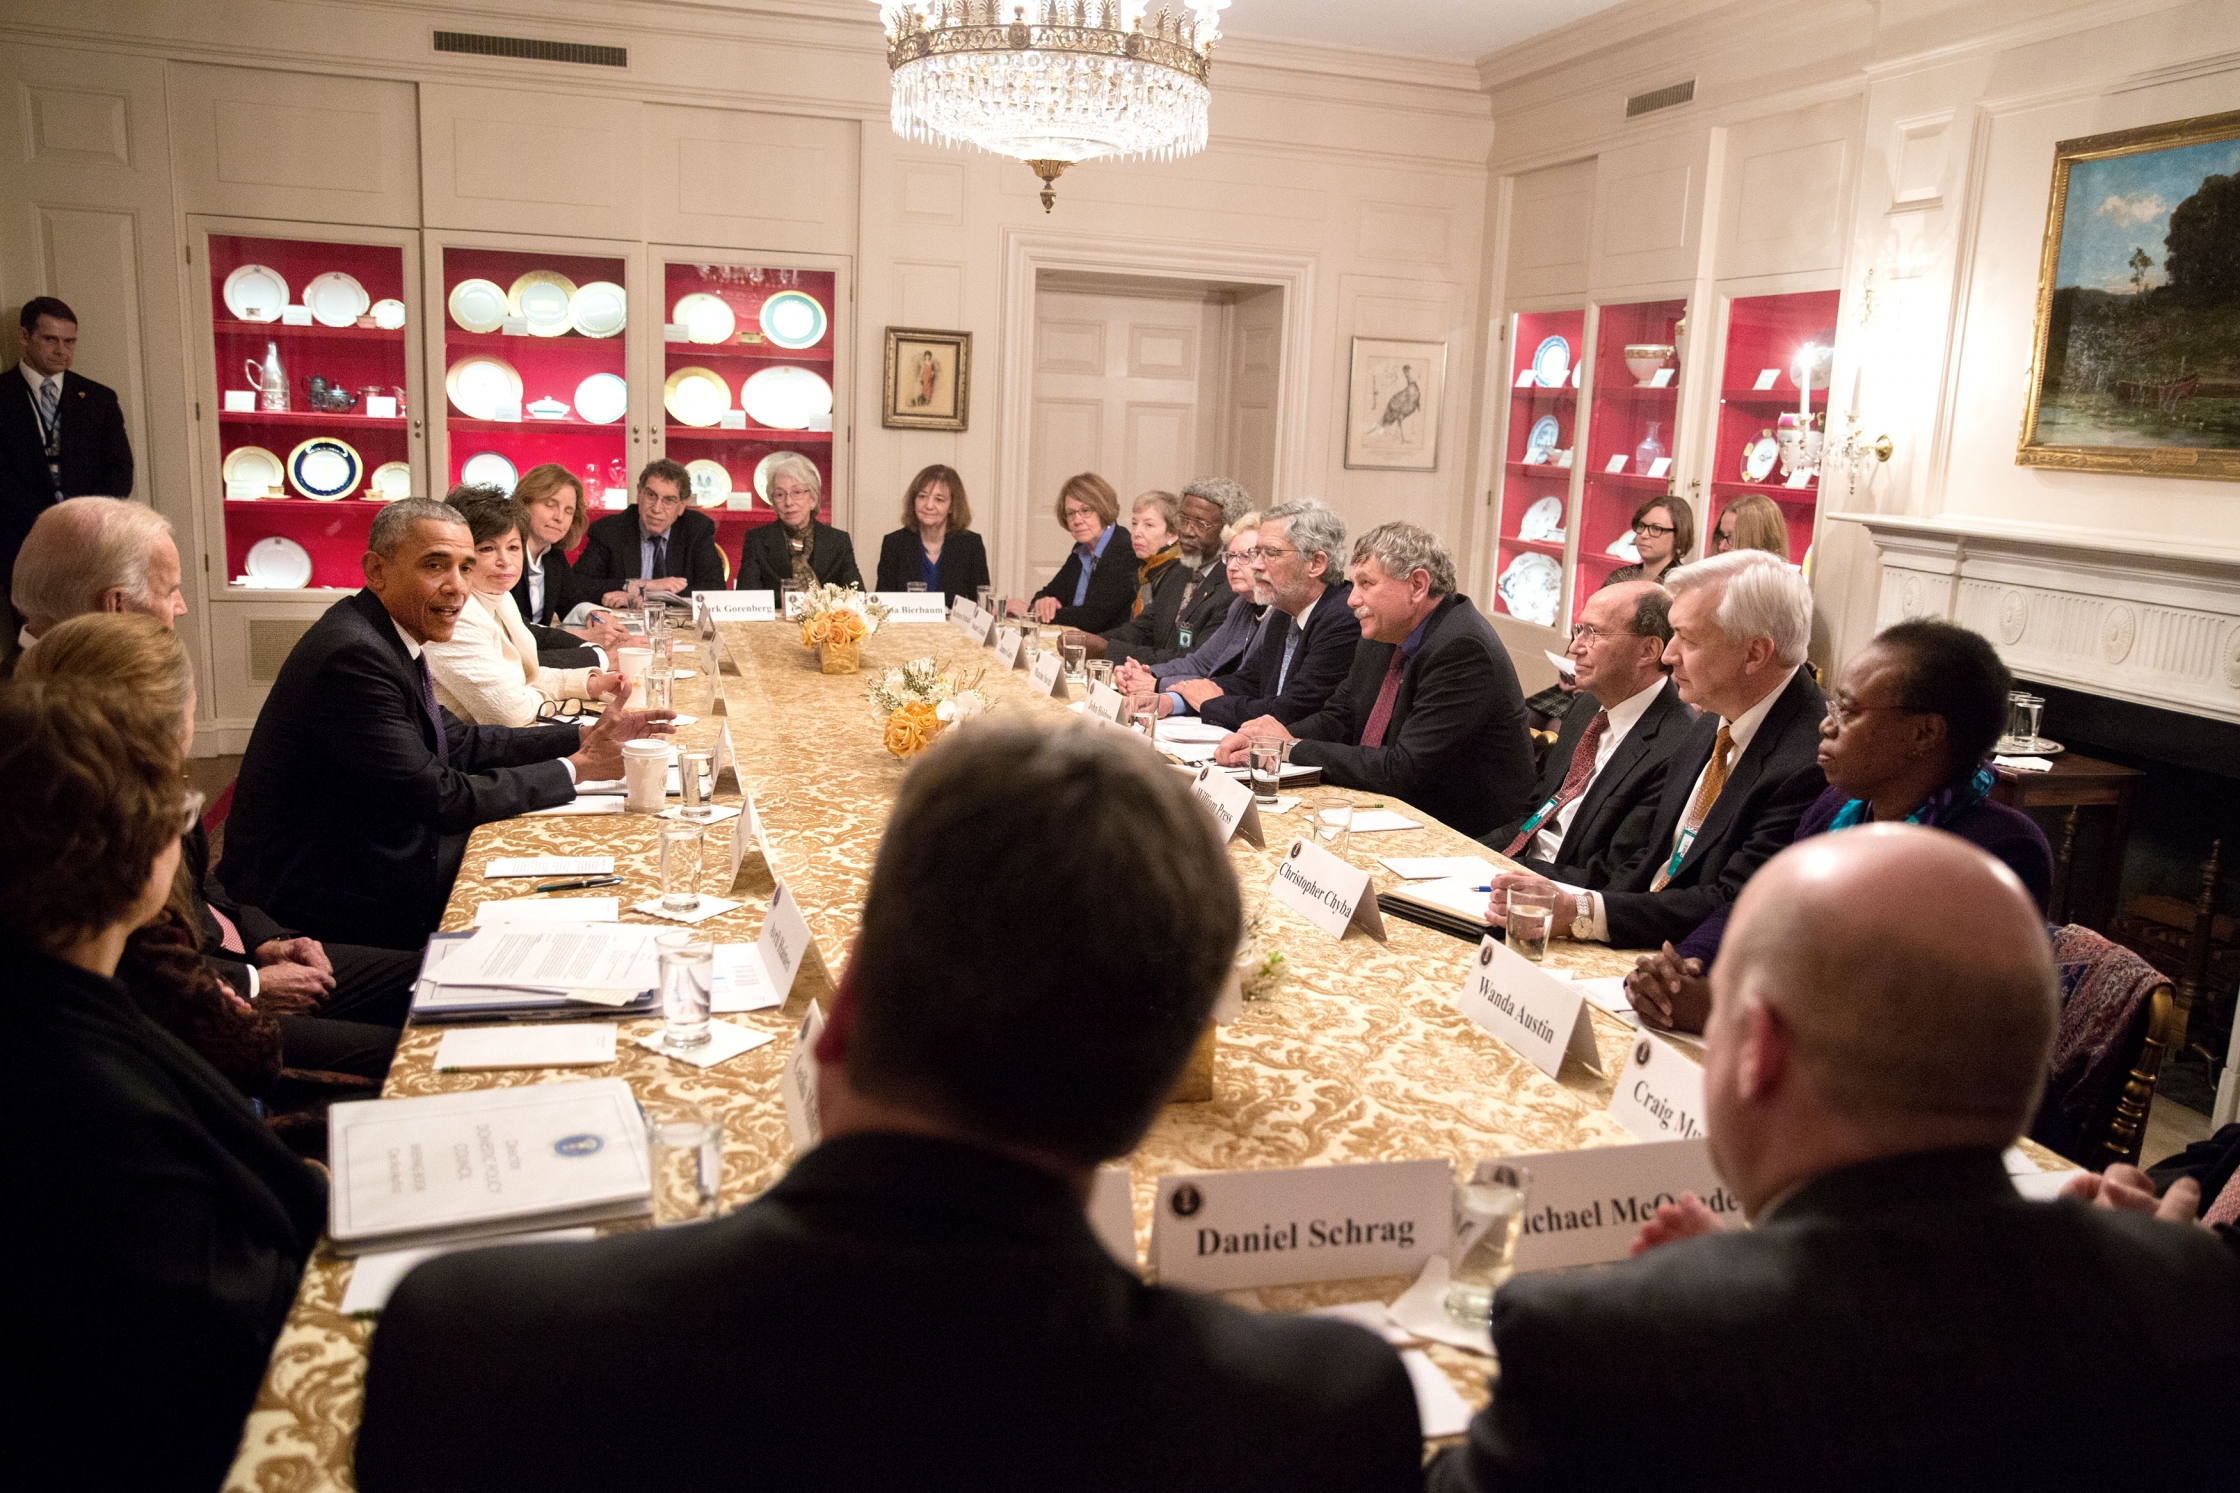 President Barack Obama and Vice President Joe Biden meet with the President's Council of Advisors on Science and Technology (PCAST) in the China Room of the White House, Jan. 5, 2017. (Official White House Photo by Pete Souza)